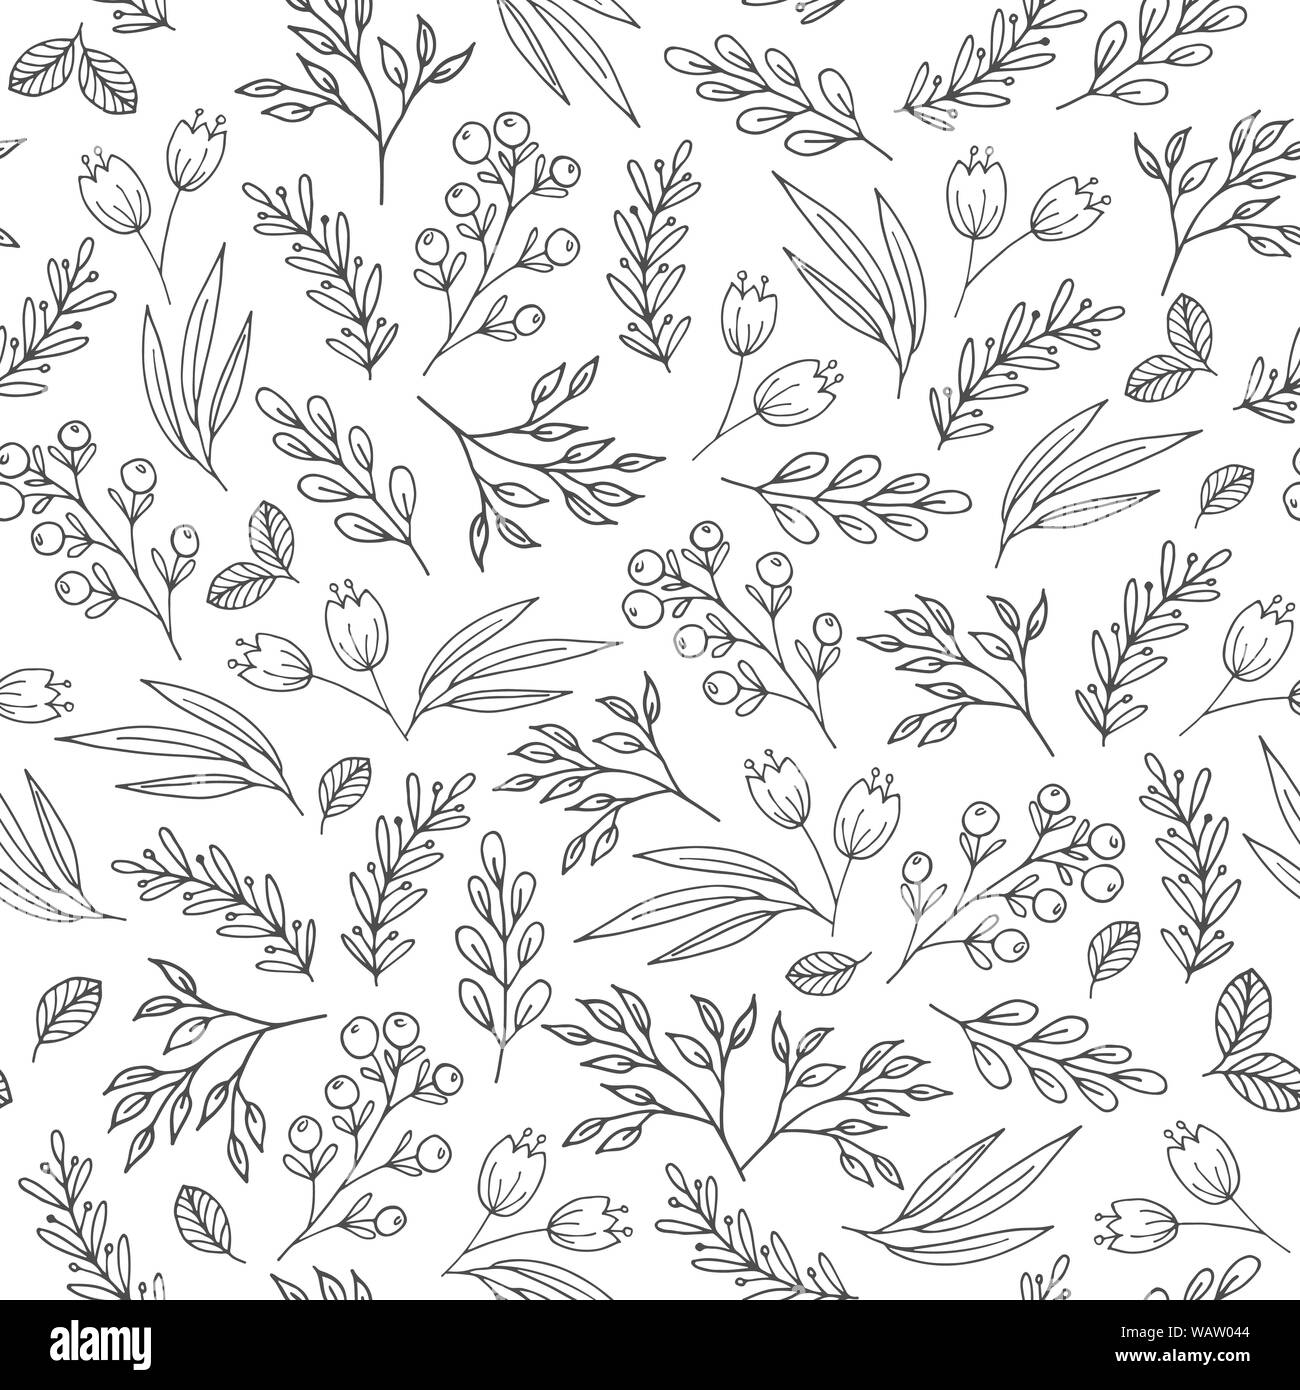 Floral seamless pattern with flowers, plants, berries. May be used as a coloring book Stock Photo